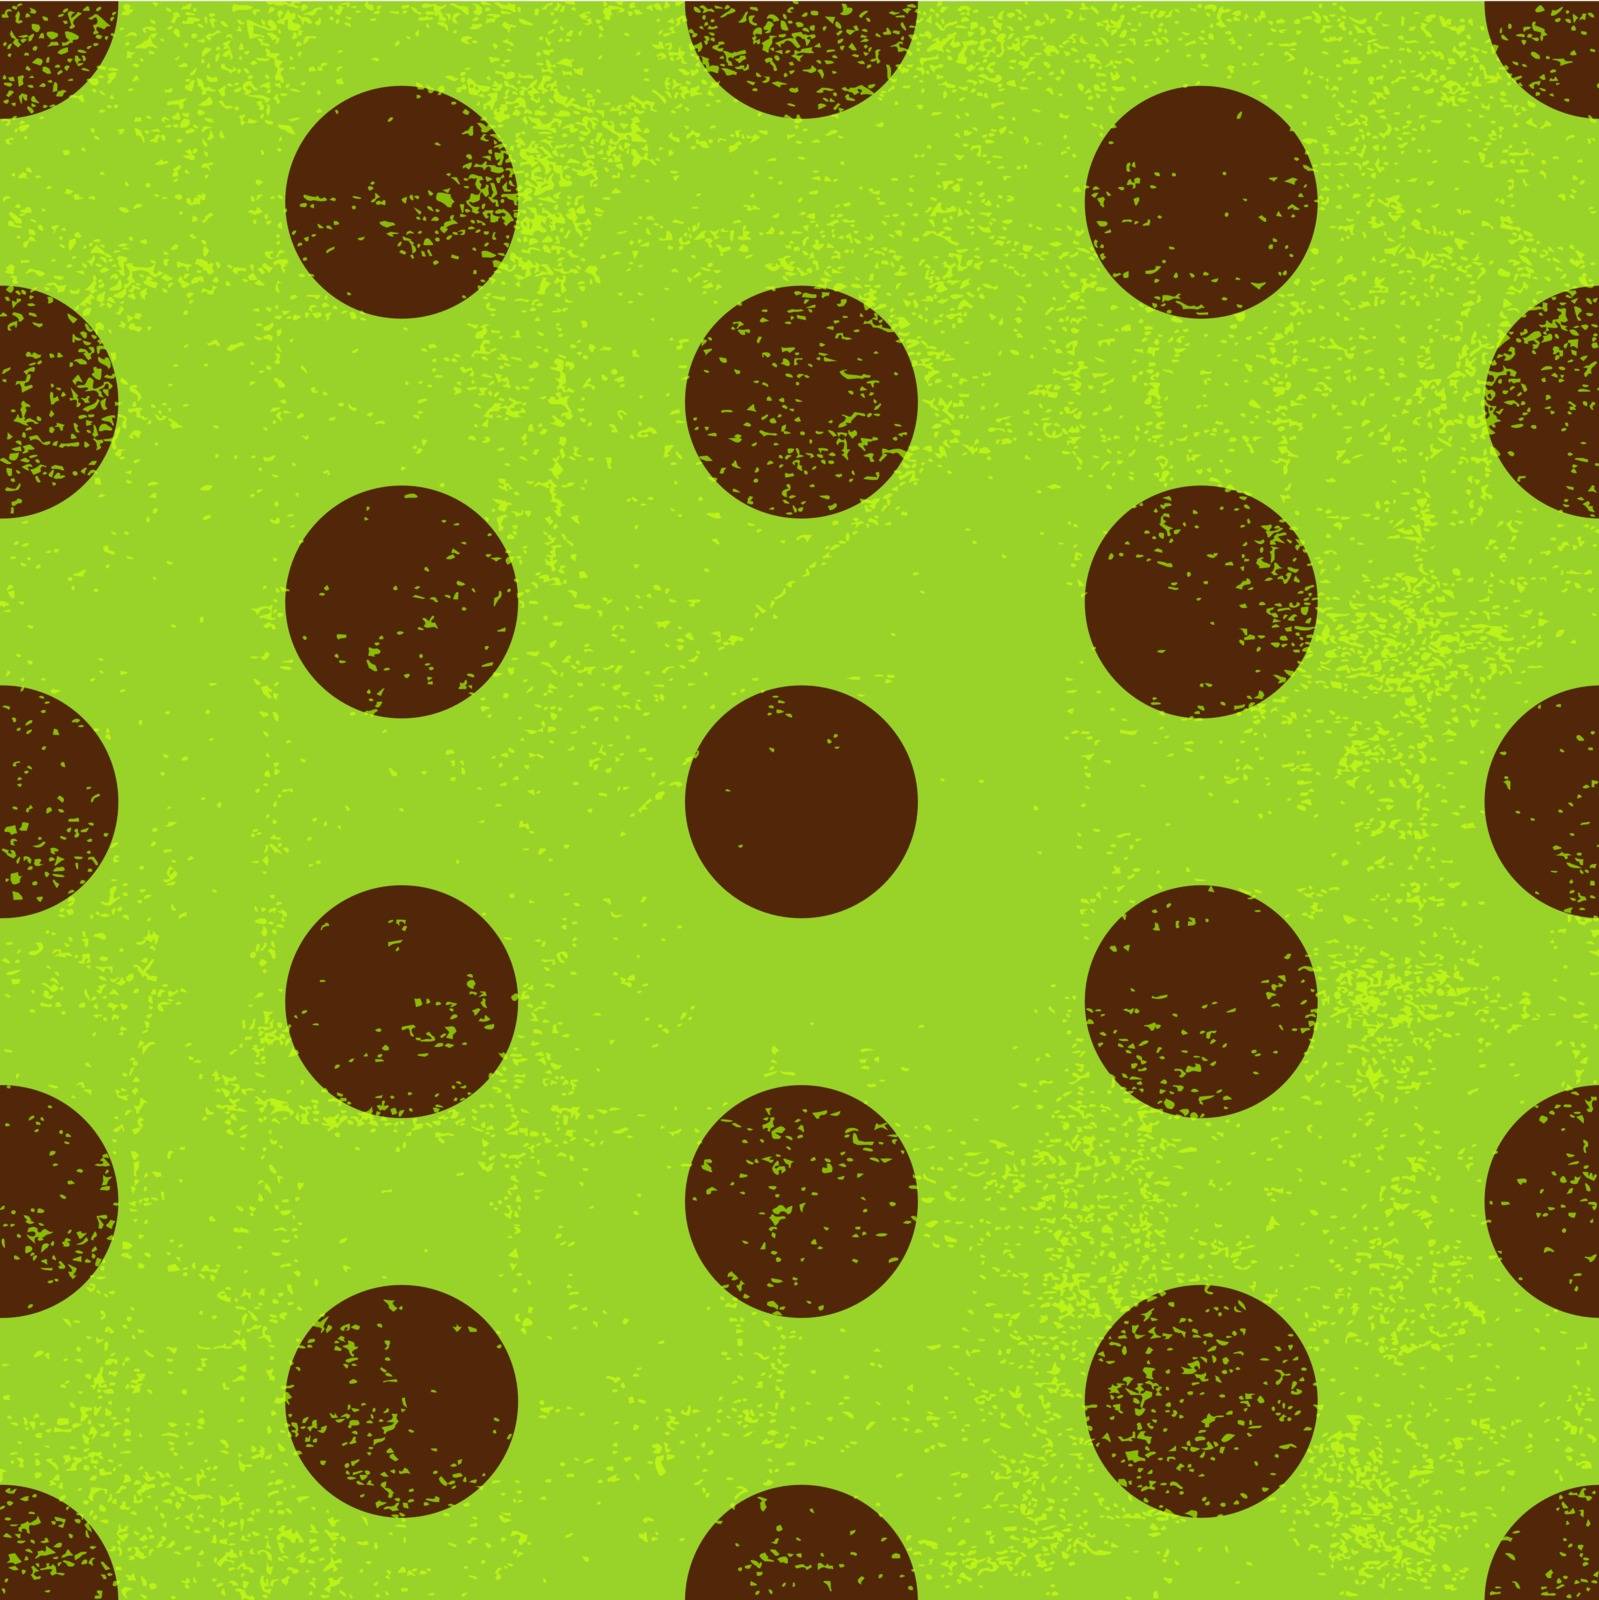 Seamless grungy green pattern by OlgaDrozd